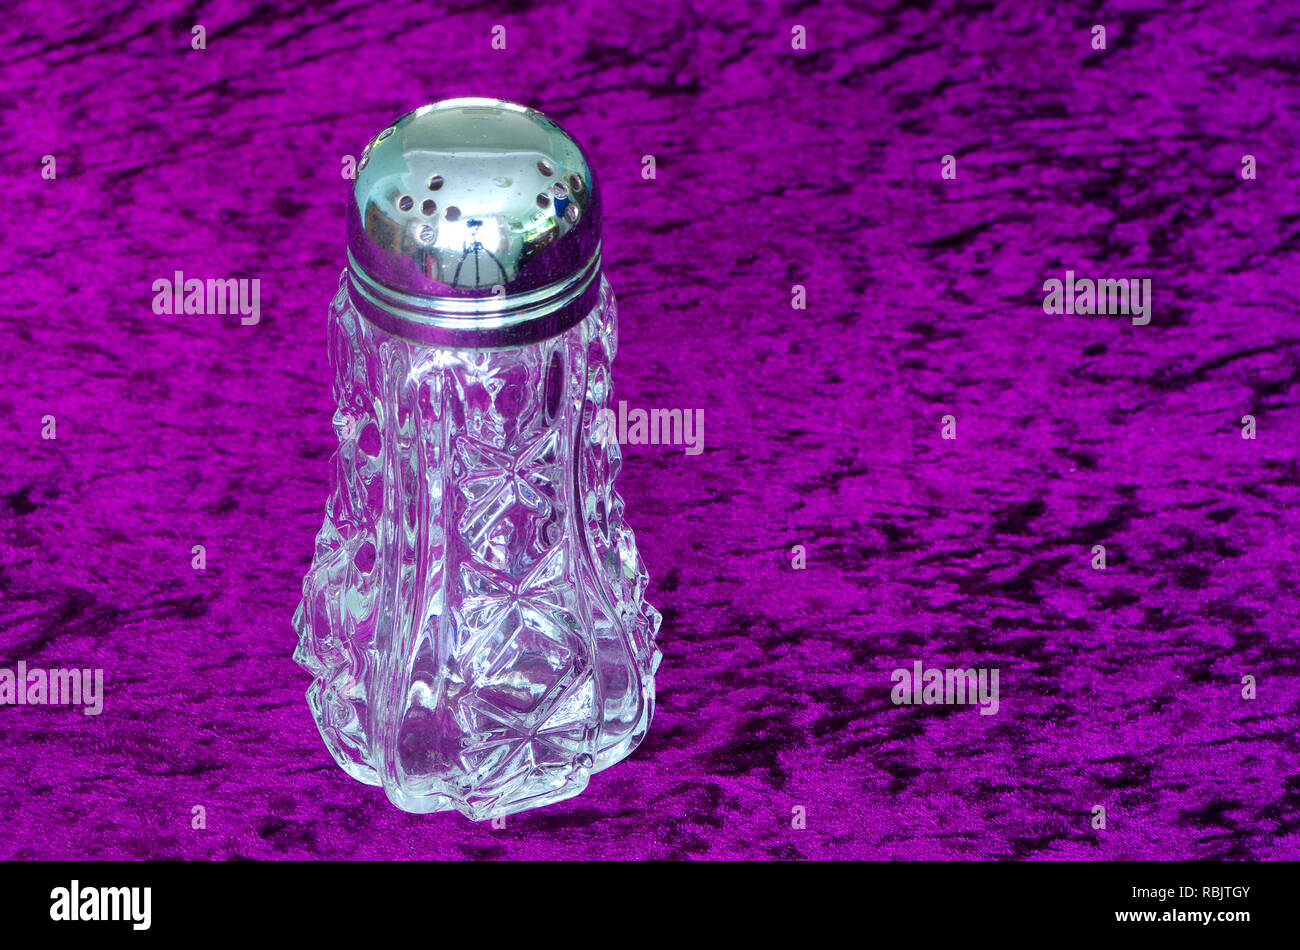 Cut Glass Crystal Sugar Shaker with Silver Plated Top Stock Photo